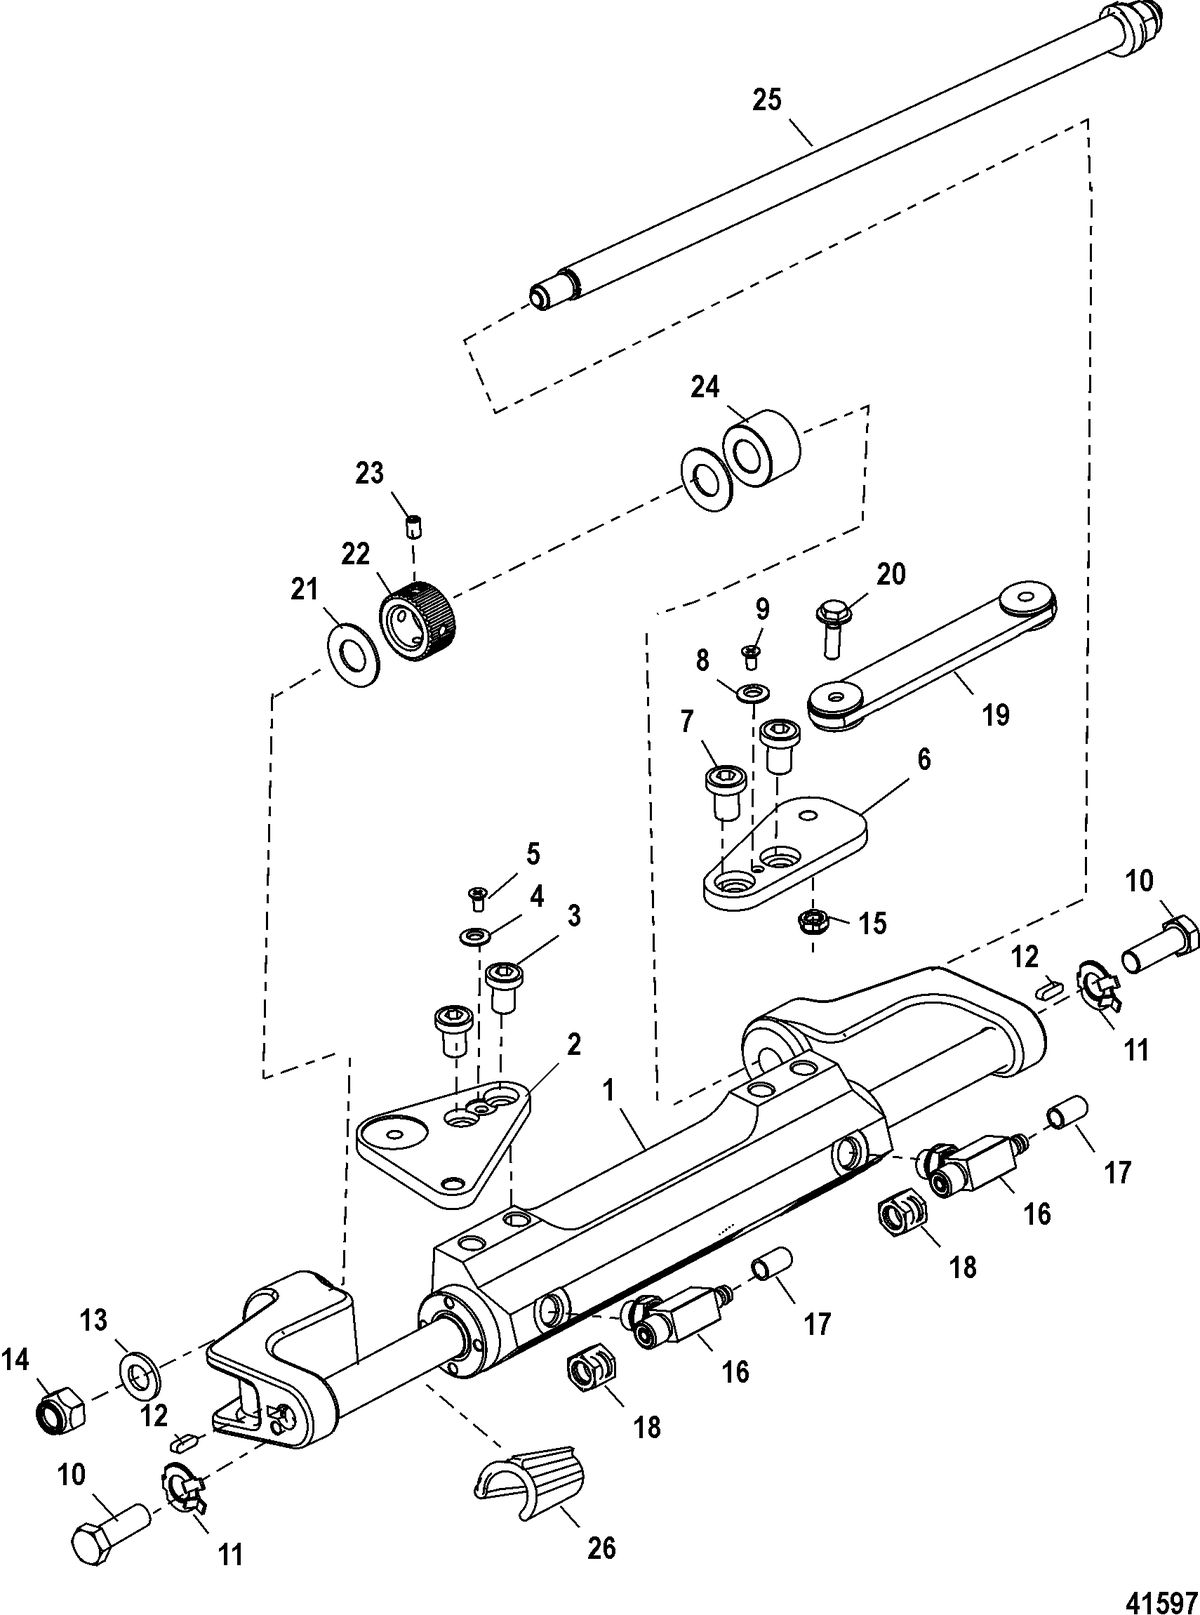 ACCESSORIES STEERING SYSTEMS AND COMPONENTS Steering Actuator Assembly(898349A14)